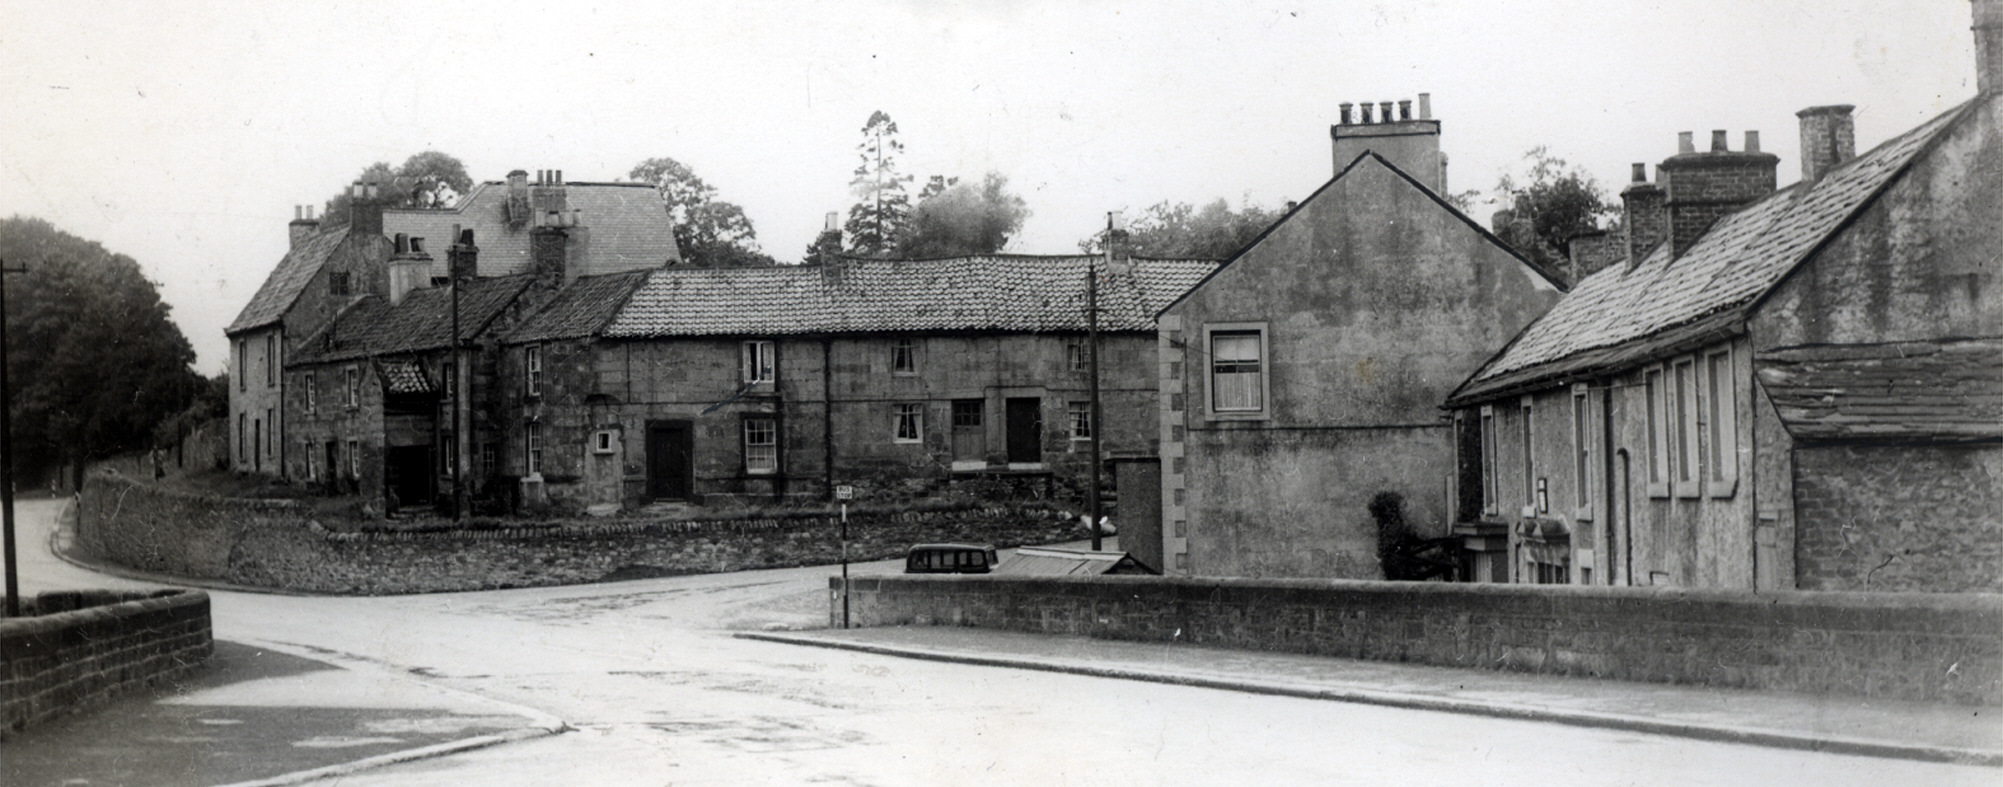 The North Yorkshire village of Barton, near Darlington, in September 1951, with the dovecota very much attached to the terrace of old houses on the left of the picture